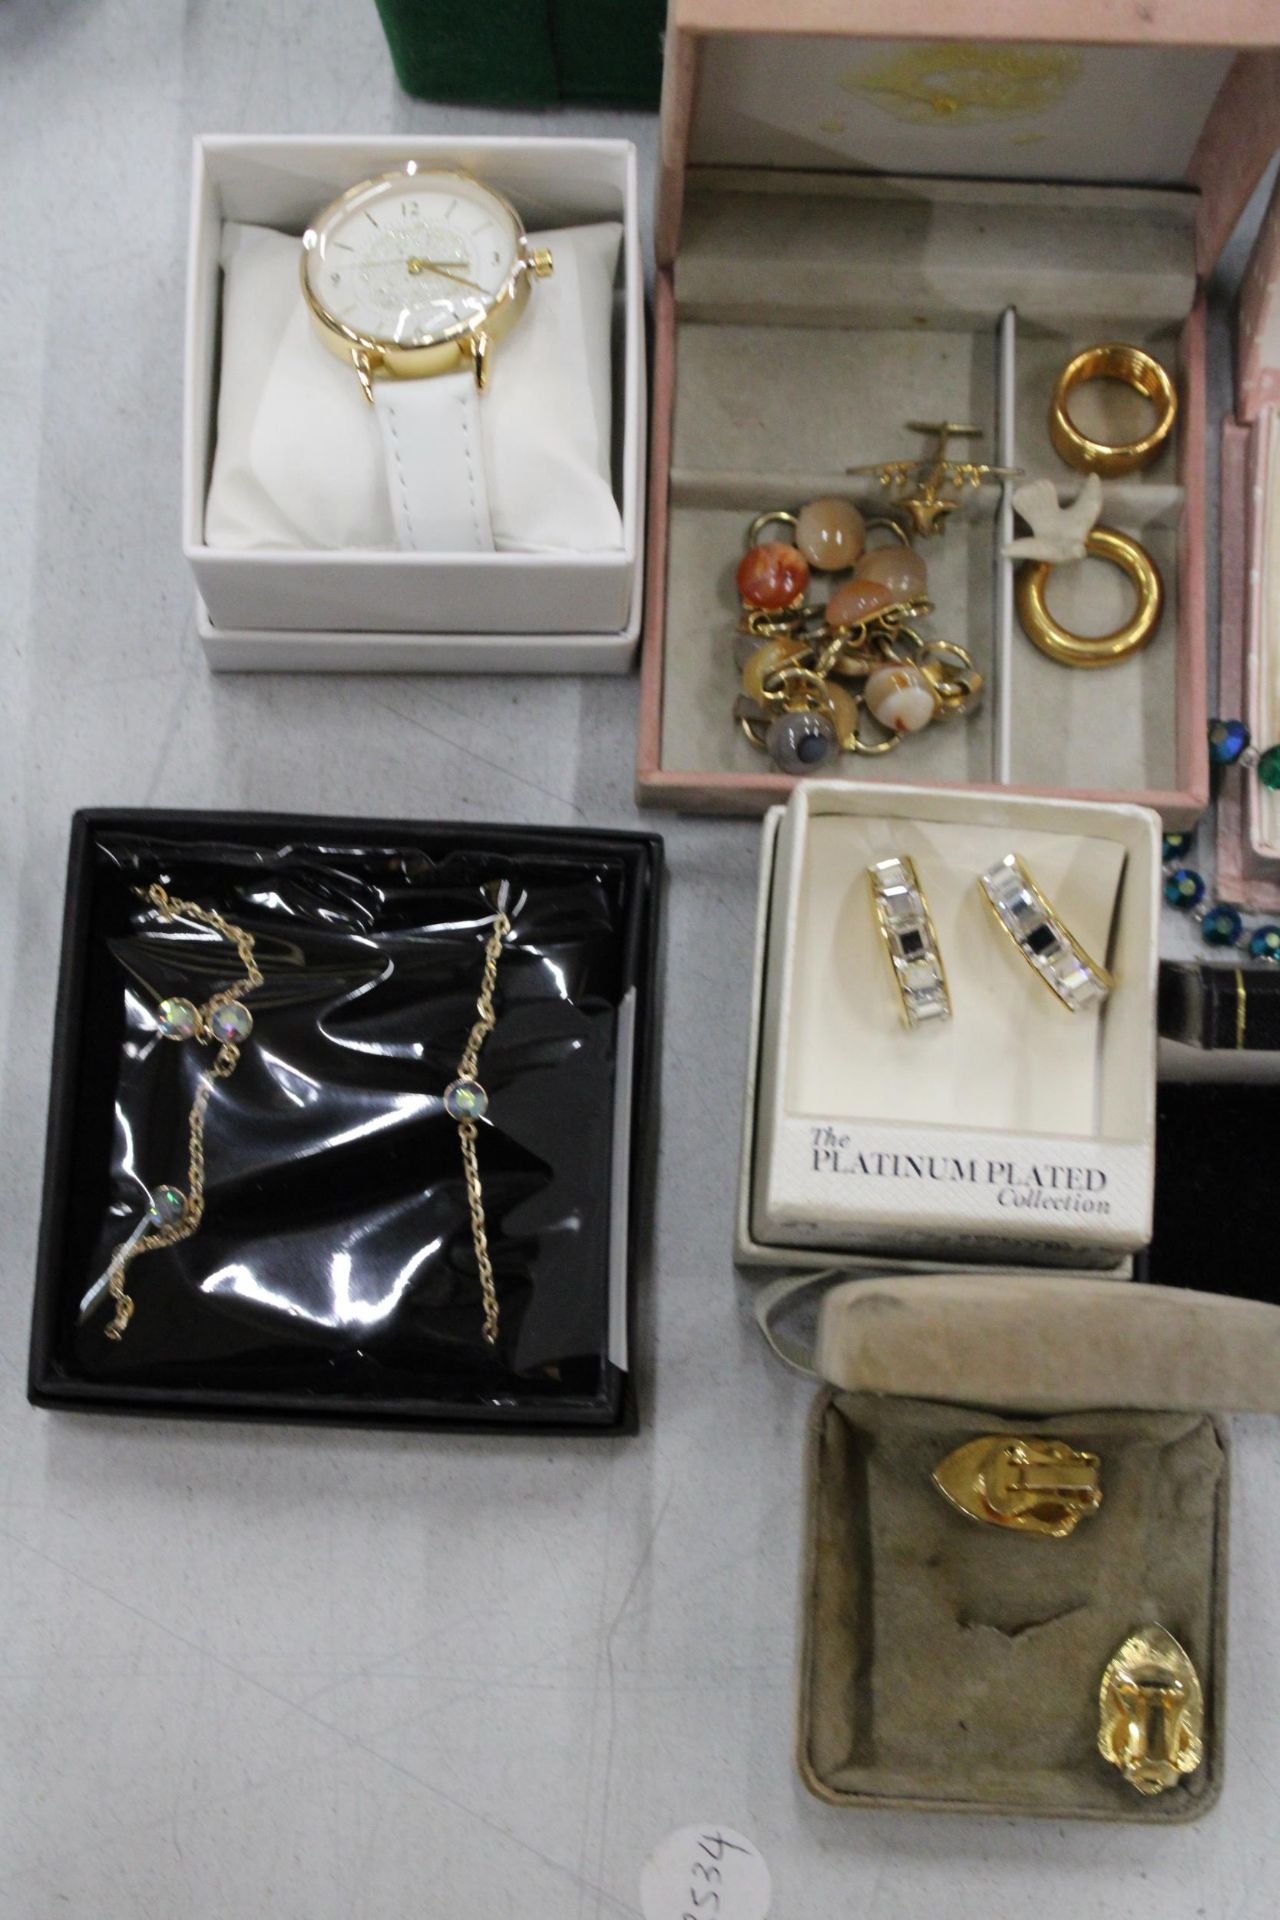 A QUANTITYOF COSTUME JEWELLERY TO INCLUDE WATCHES, NECKLACES, EARRINGS, BEADS, BANGLES, ETC - Image 5 of 5